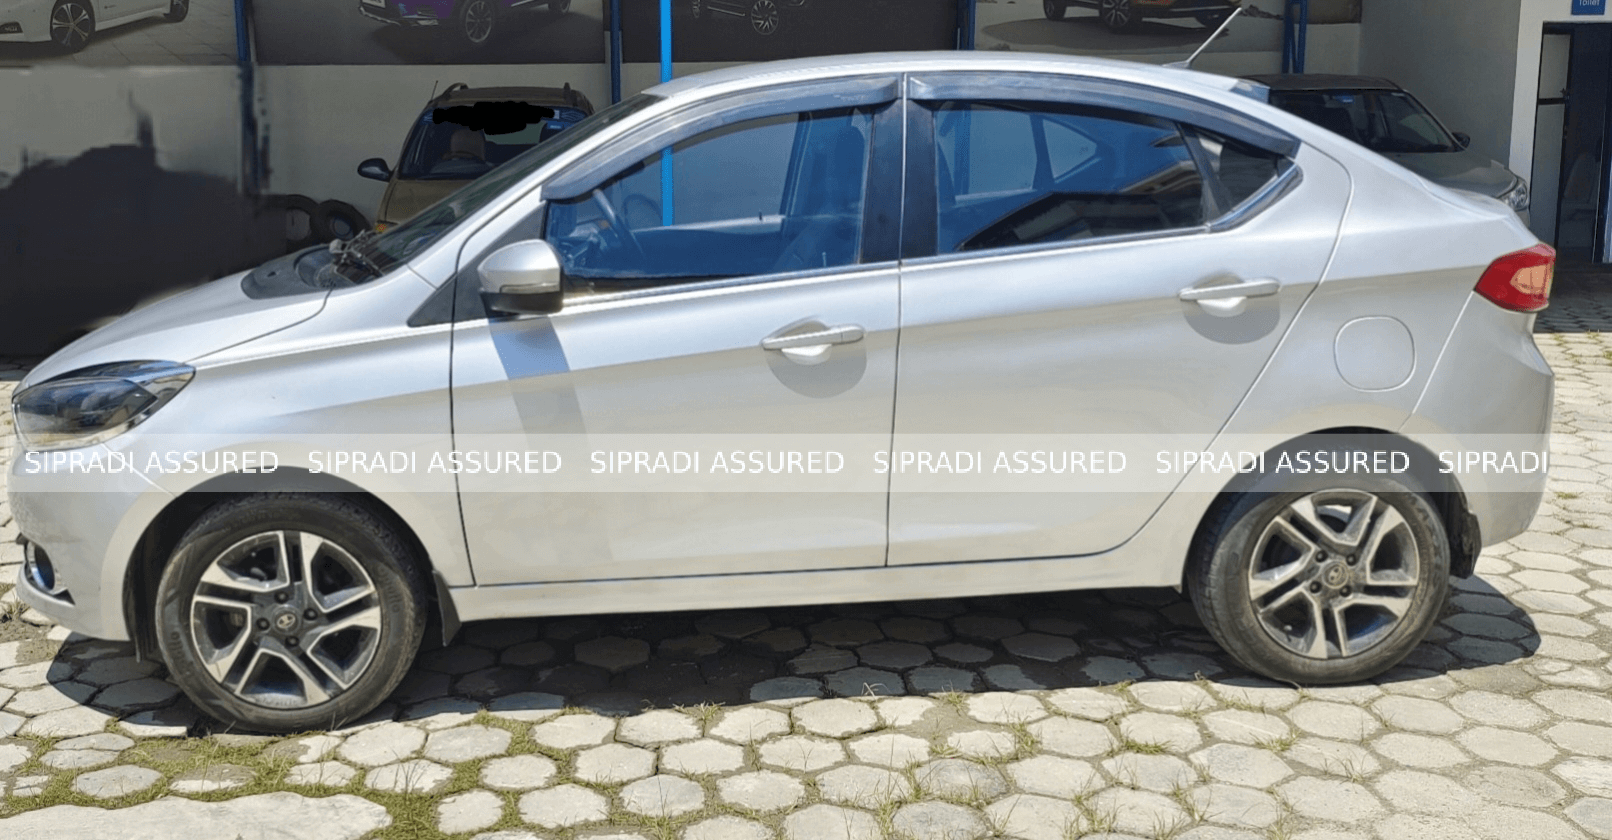 Exchange second hand car in Nepal
Best second hand car in Nepal
Best price second hand car near me